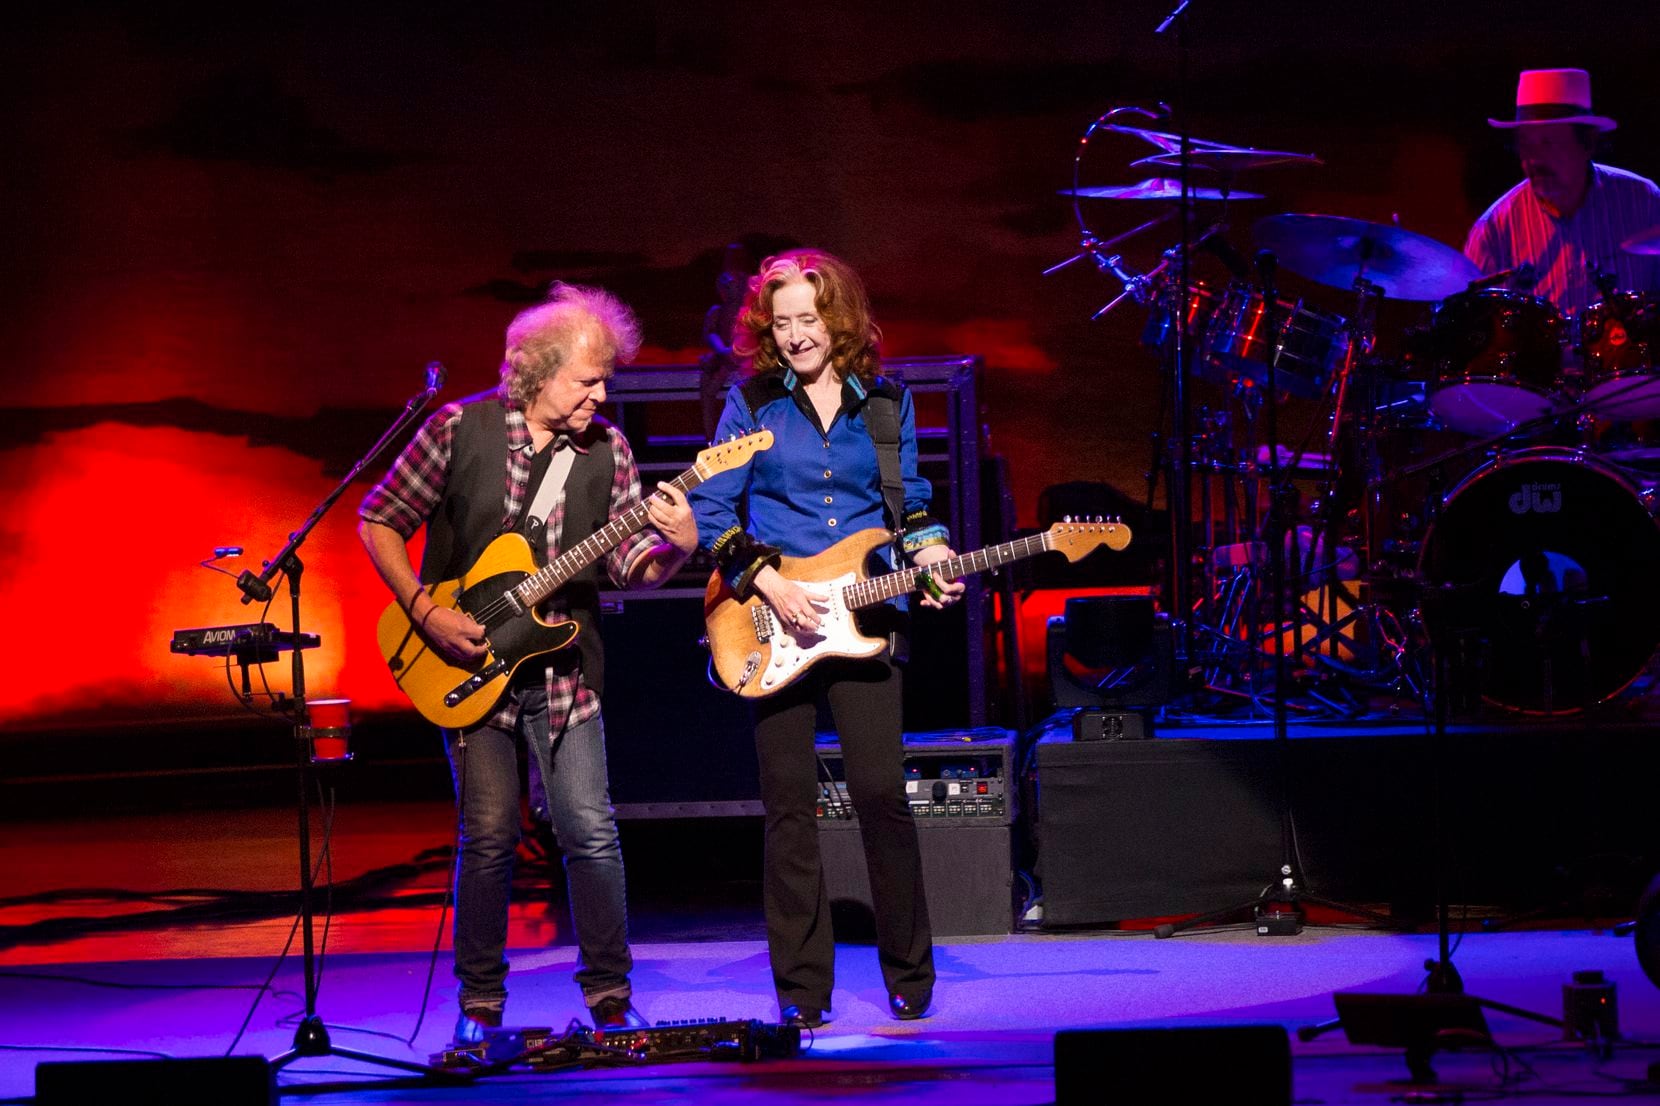 Bonnie Raitt performed with guitarist George Marinelli at the Winspear Opera House in Dallas...